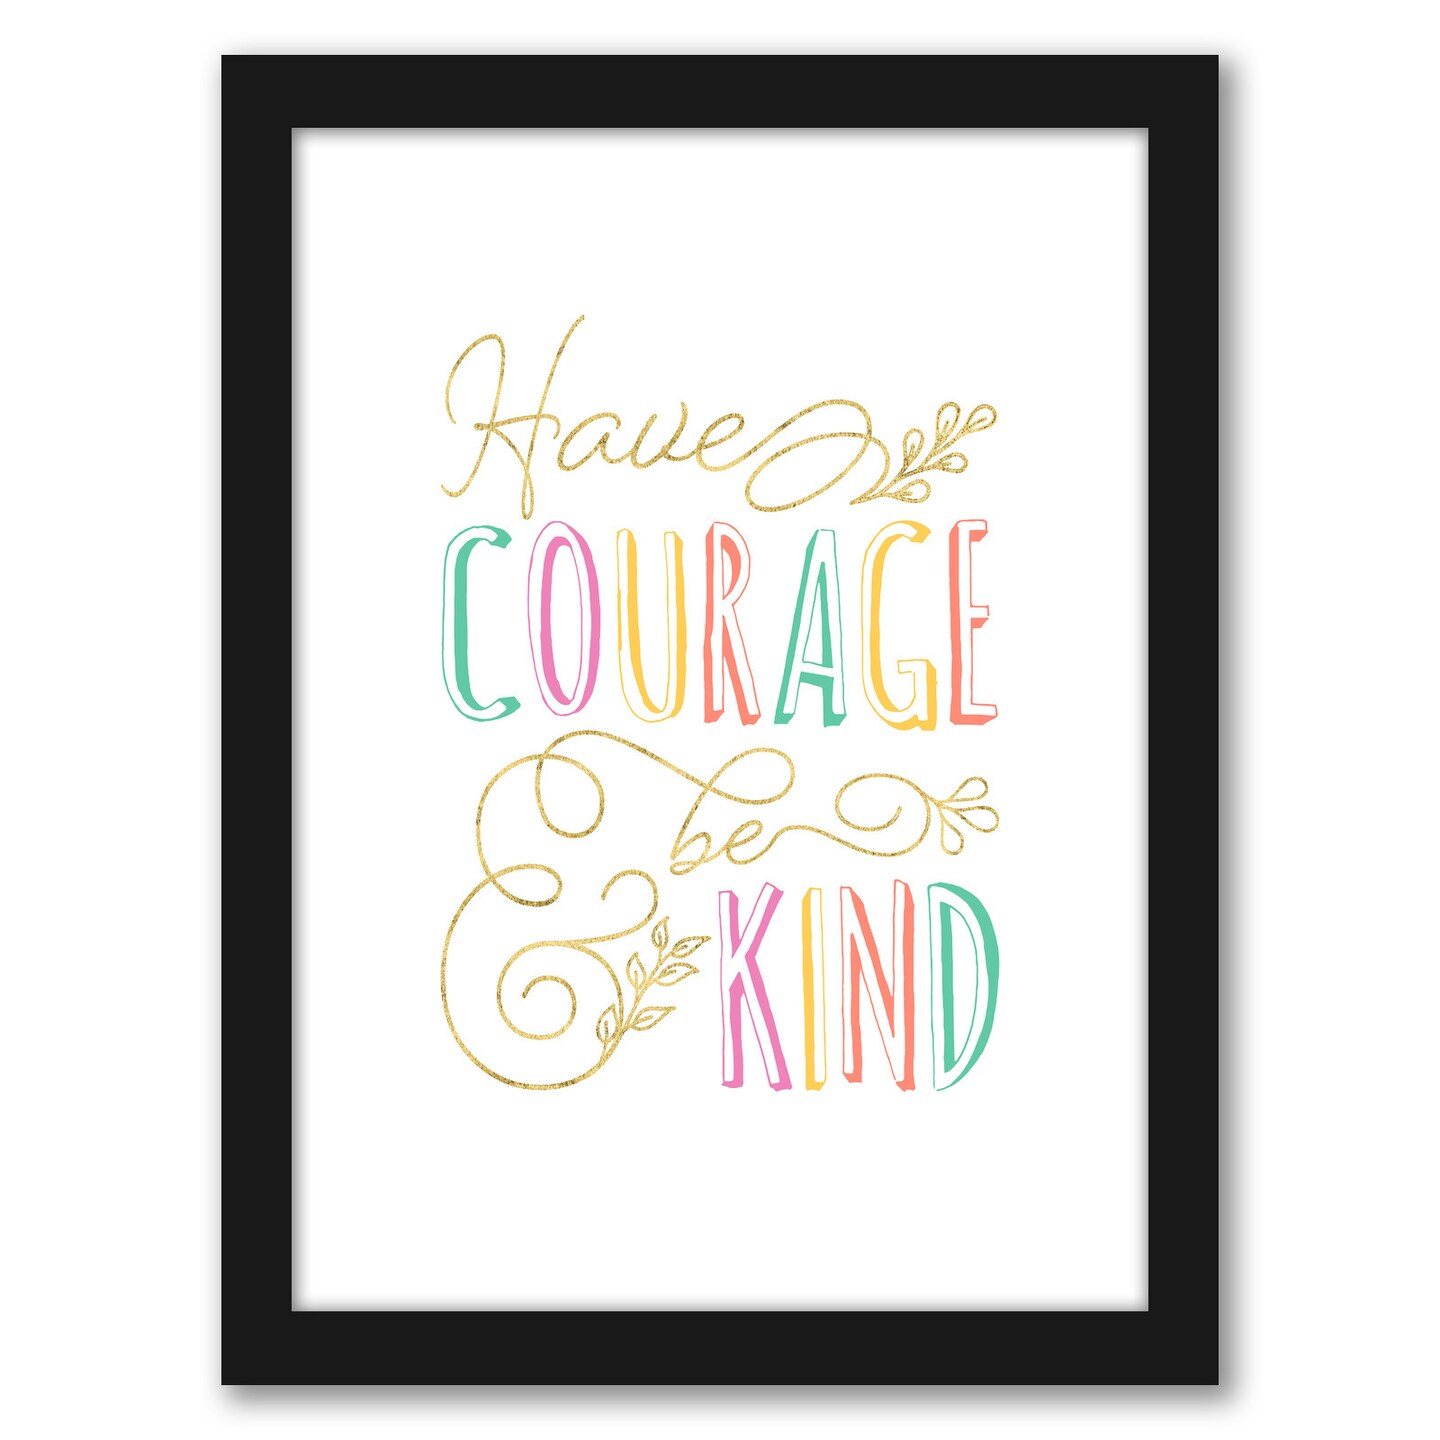 Have Courage And Be Kind by Elena David Frame  - Americanflat